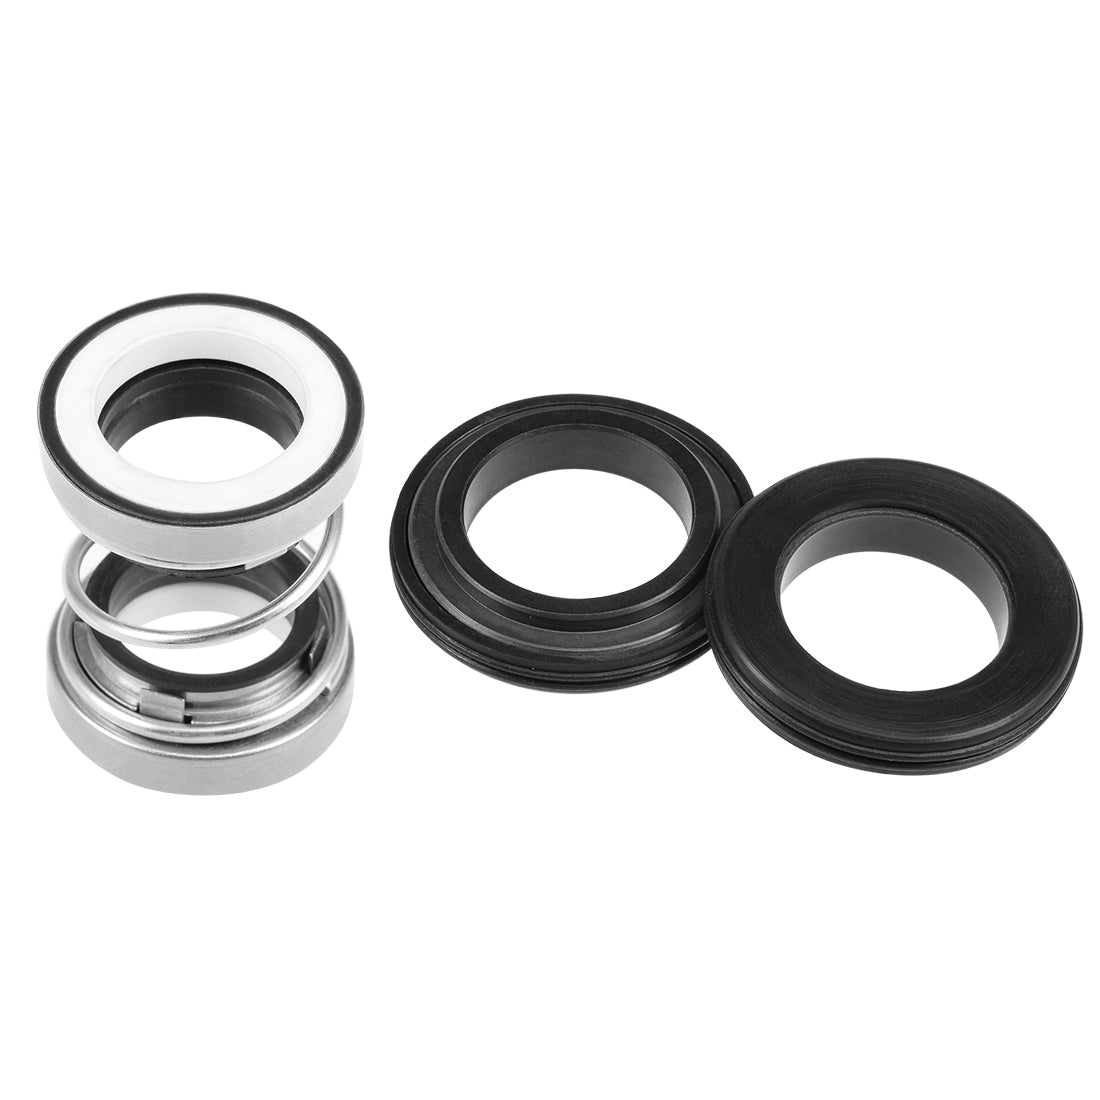 uxcell Uxcell Mechanical Shaft Seal Replacement 22.3mm ID for Pool Spa Pump 202-20